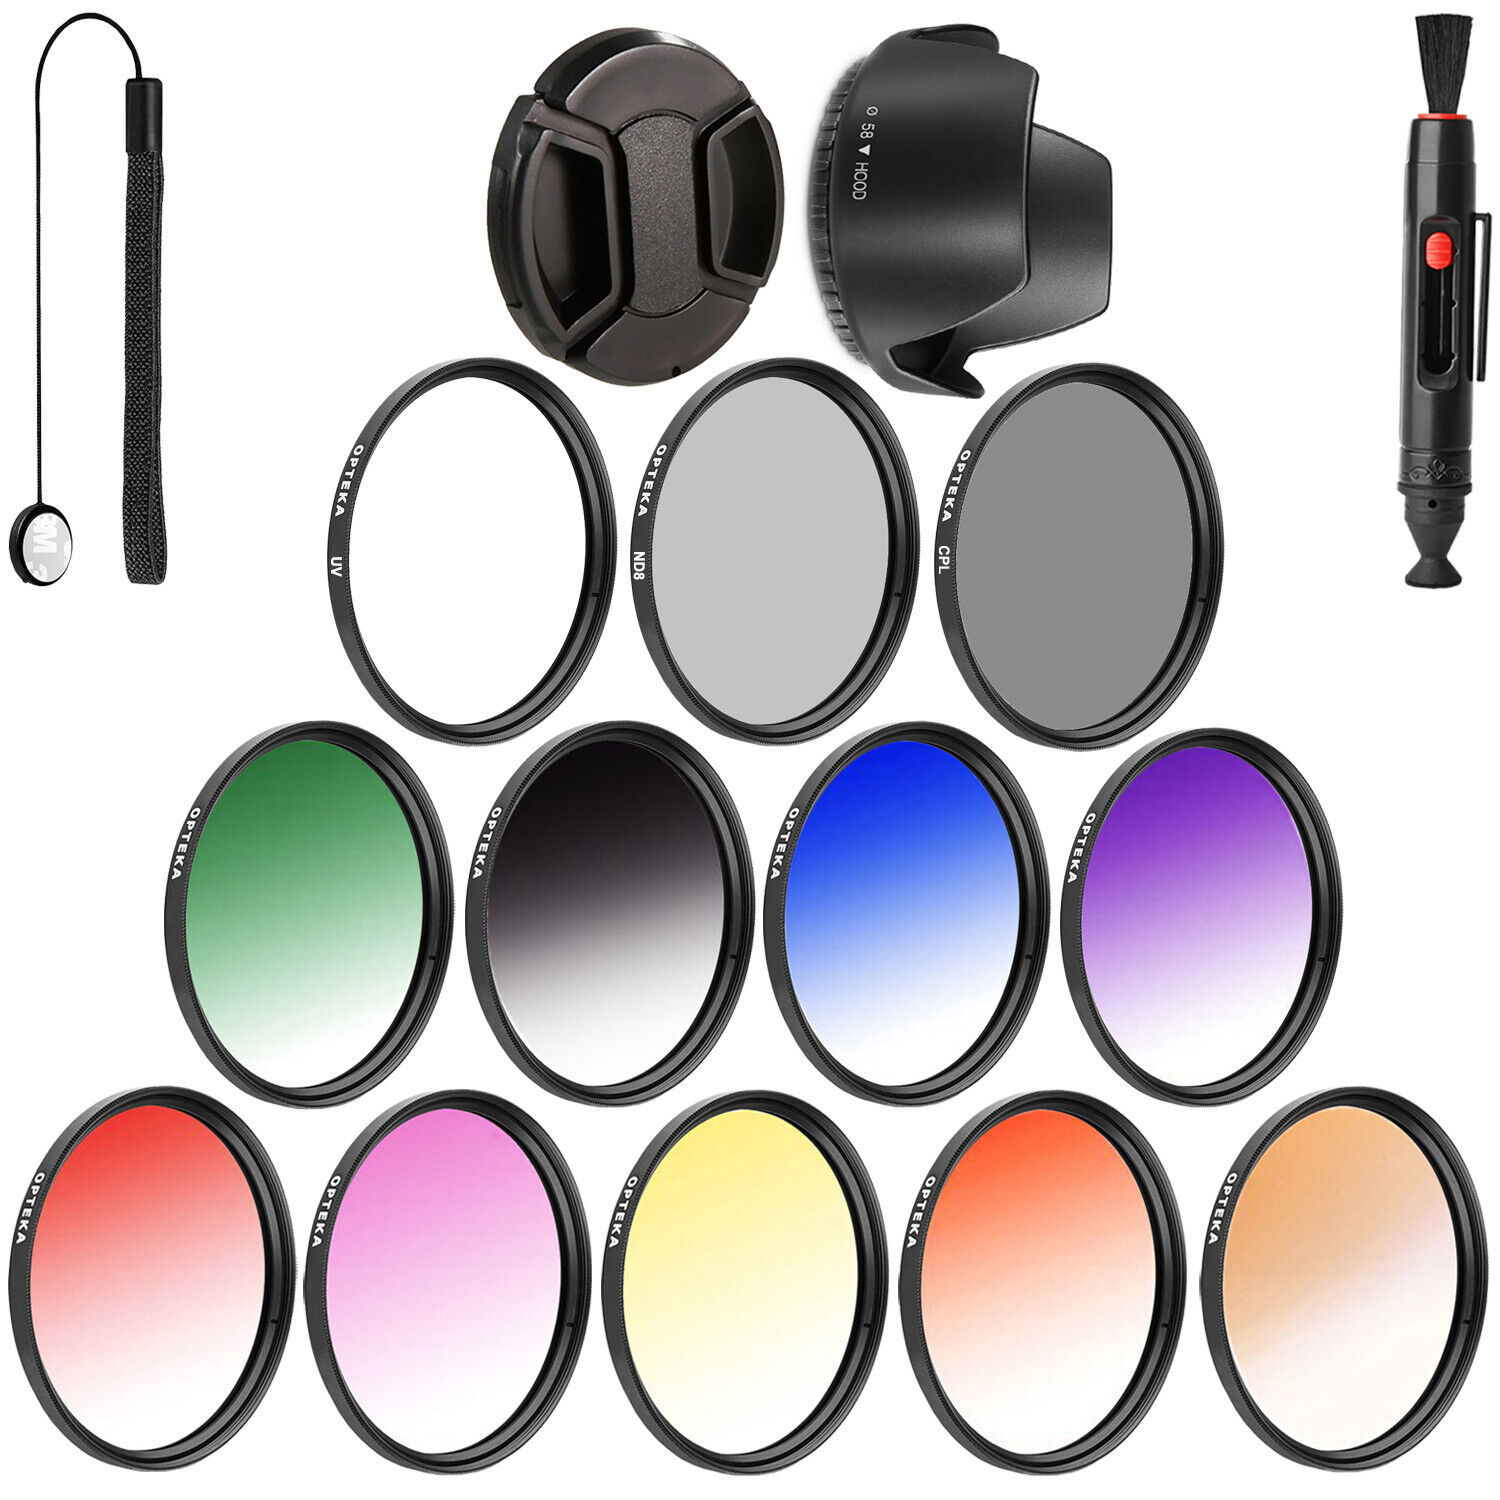 Opteka 52mm 9PC Grad Color + 3PC Filter Kit for Olympus M.Zuiko ED 9-18mm 4-5.6 - $73.99